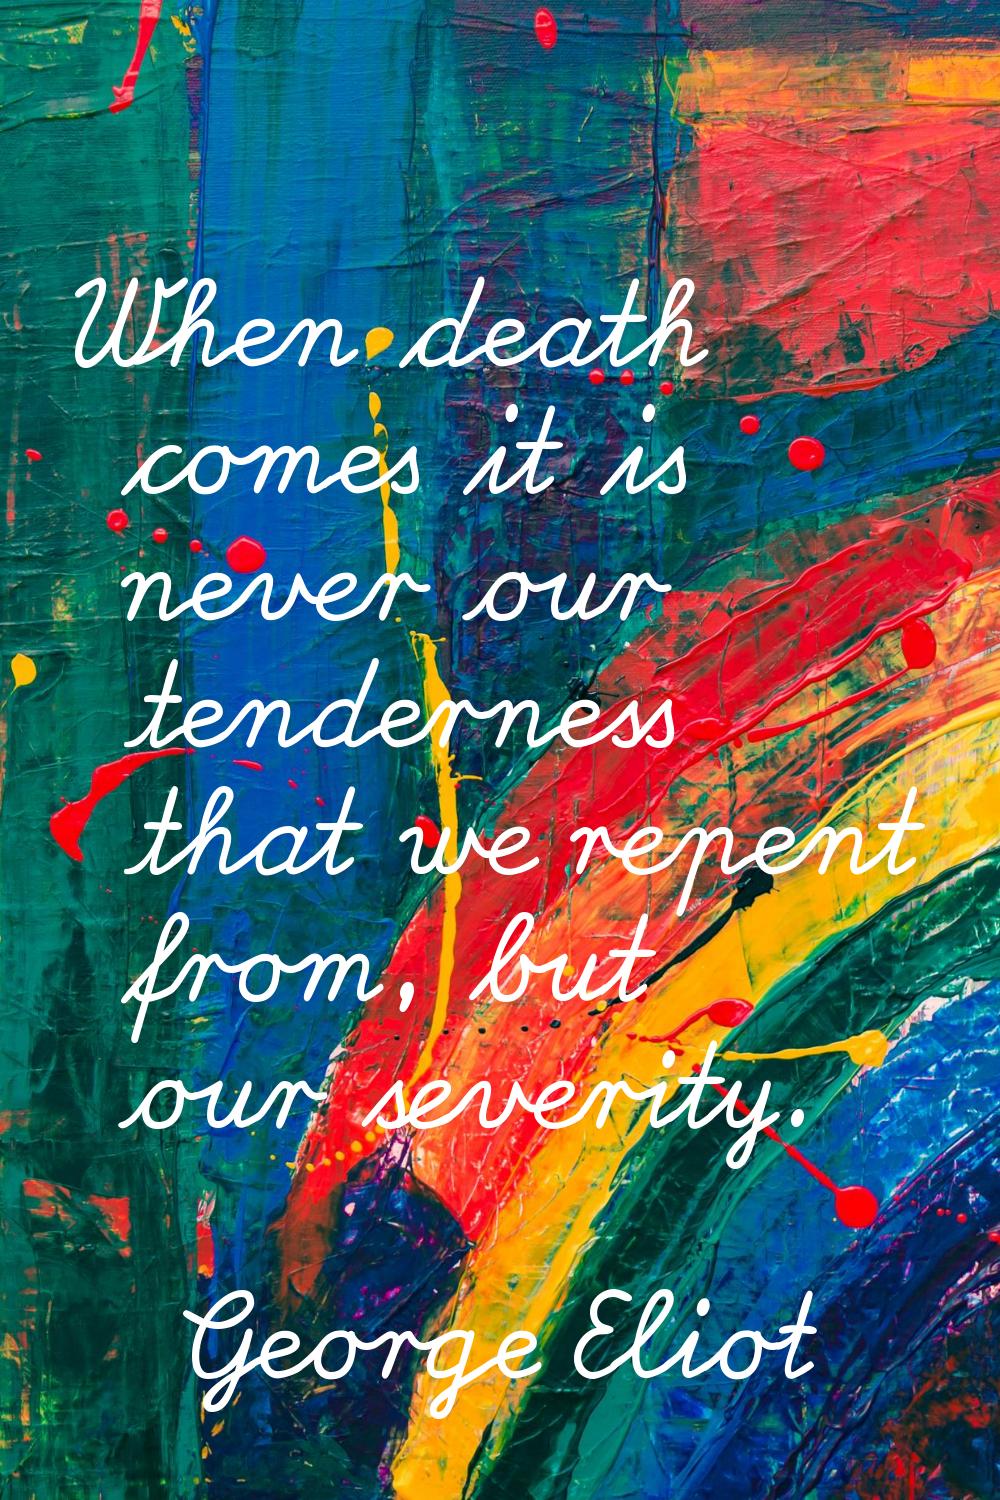 When death comes it is never our tenderness that we repent from, but our severity.